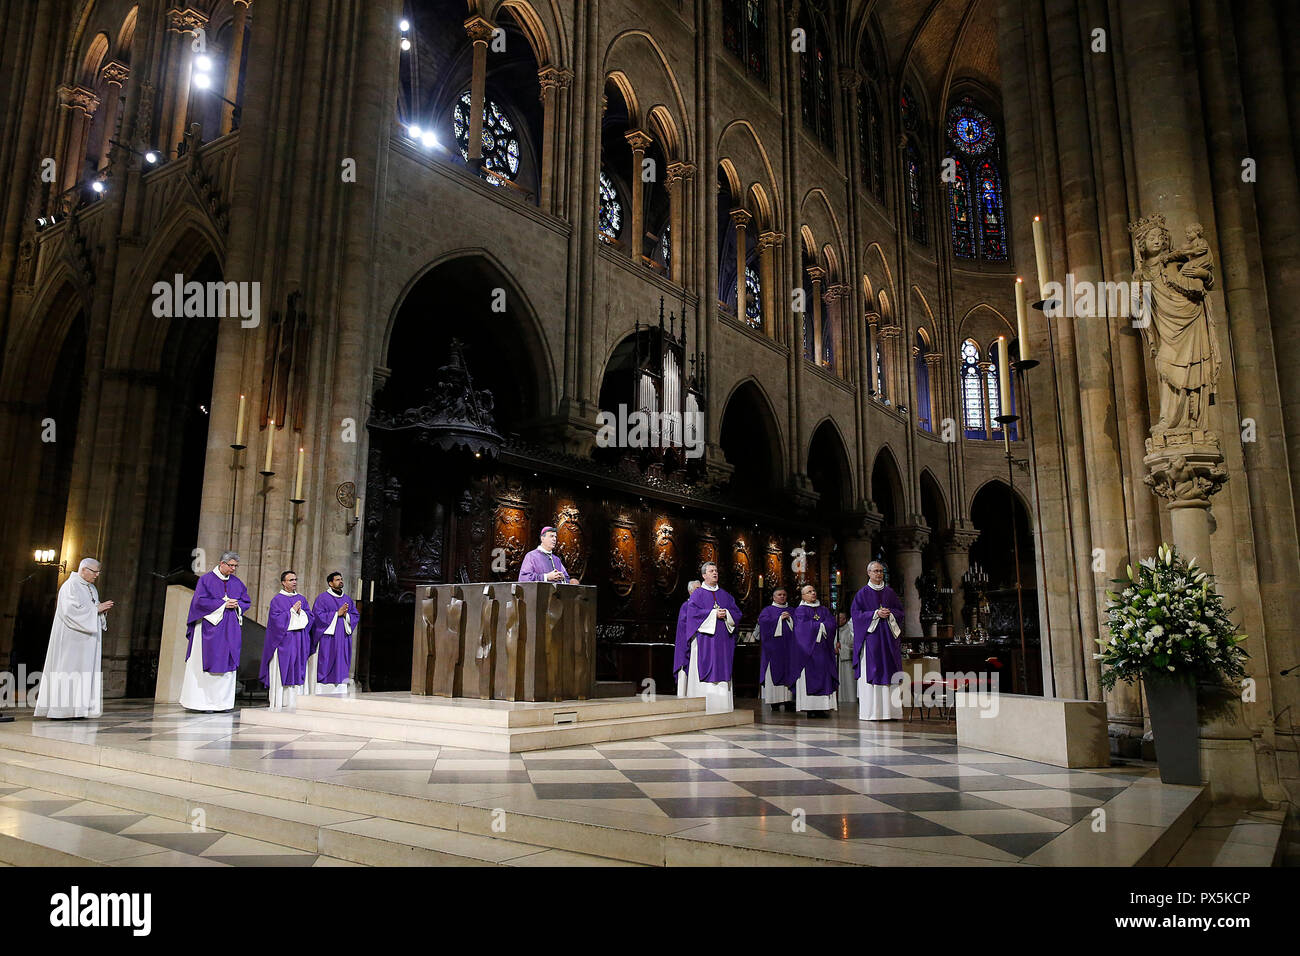 Ash wednesday celebration at Notre Dame cathedral, Paris, France. Prayer to Mary. Stock Photo